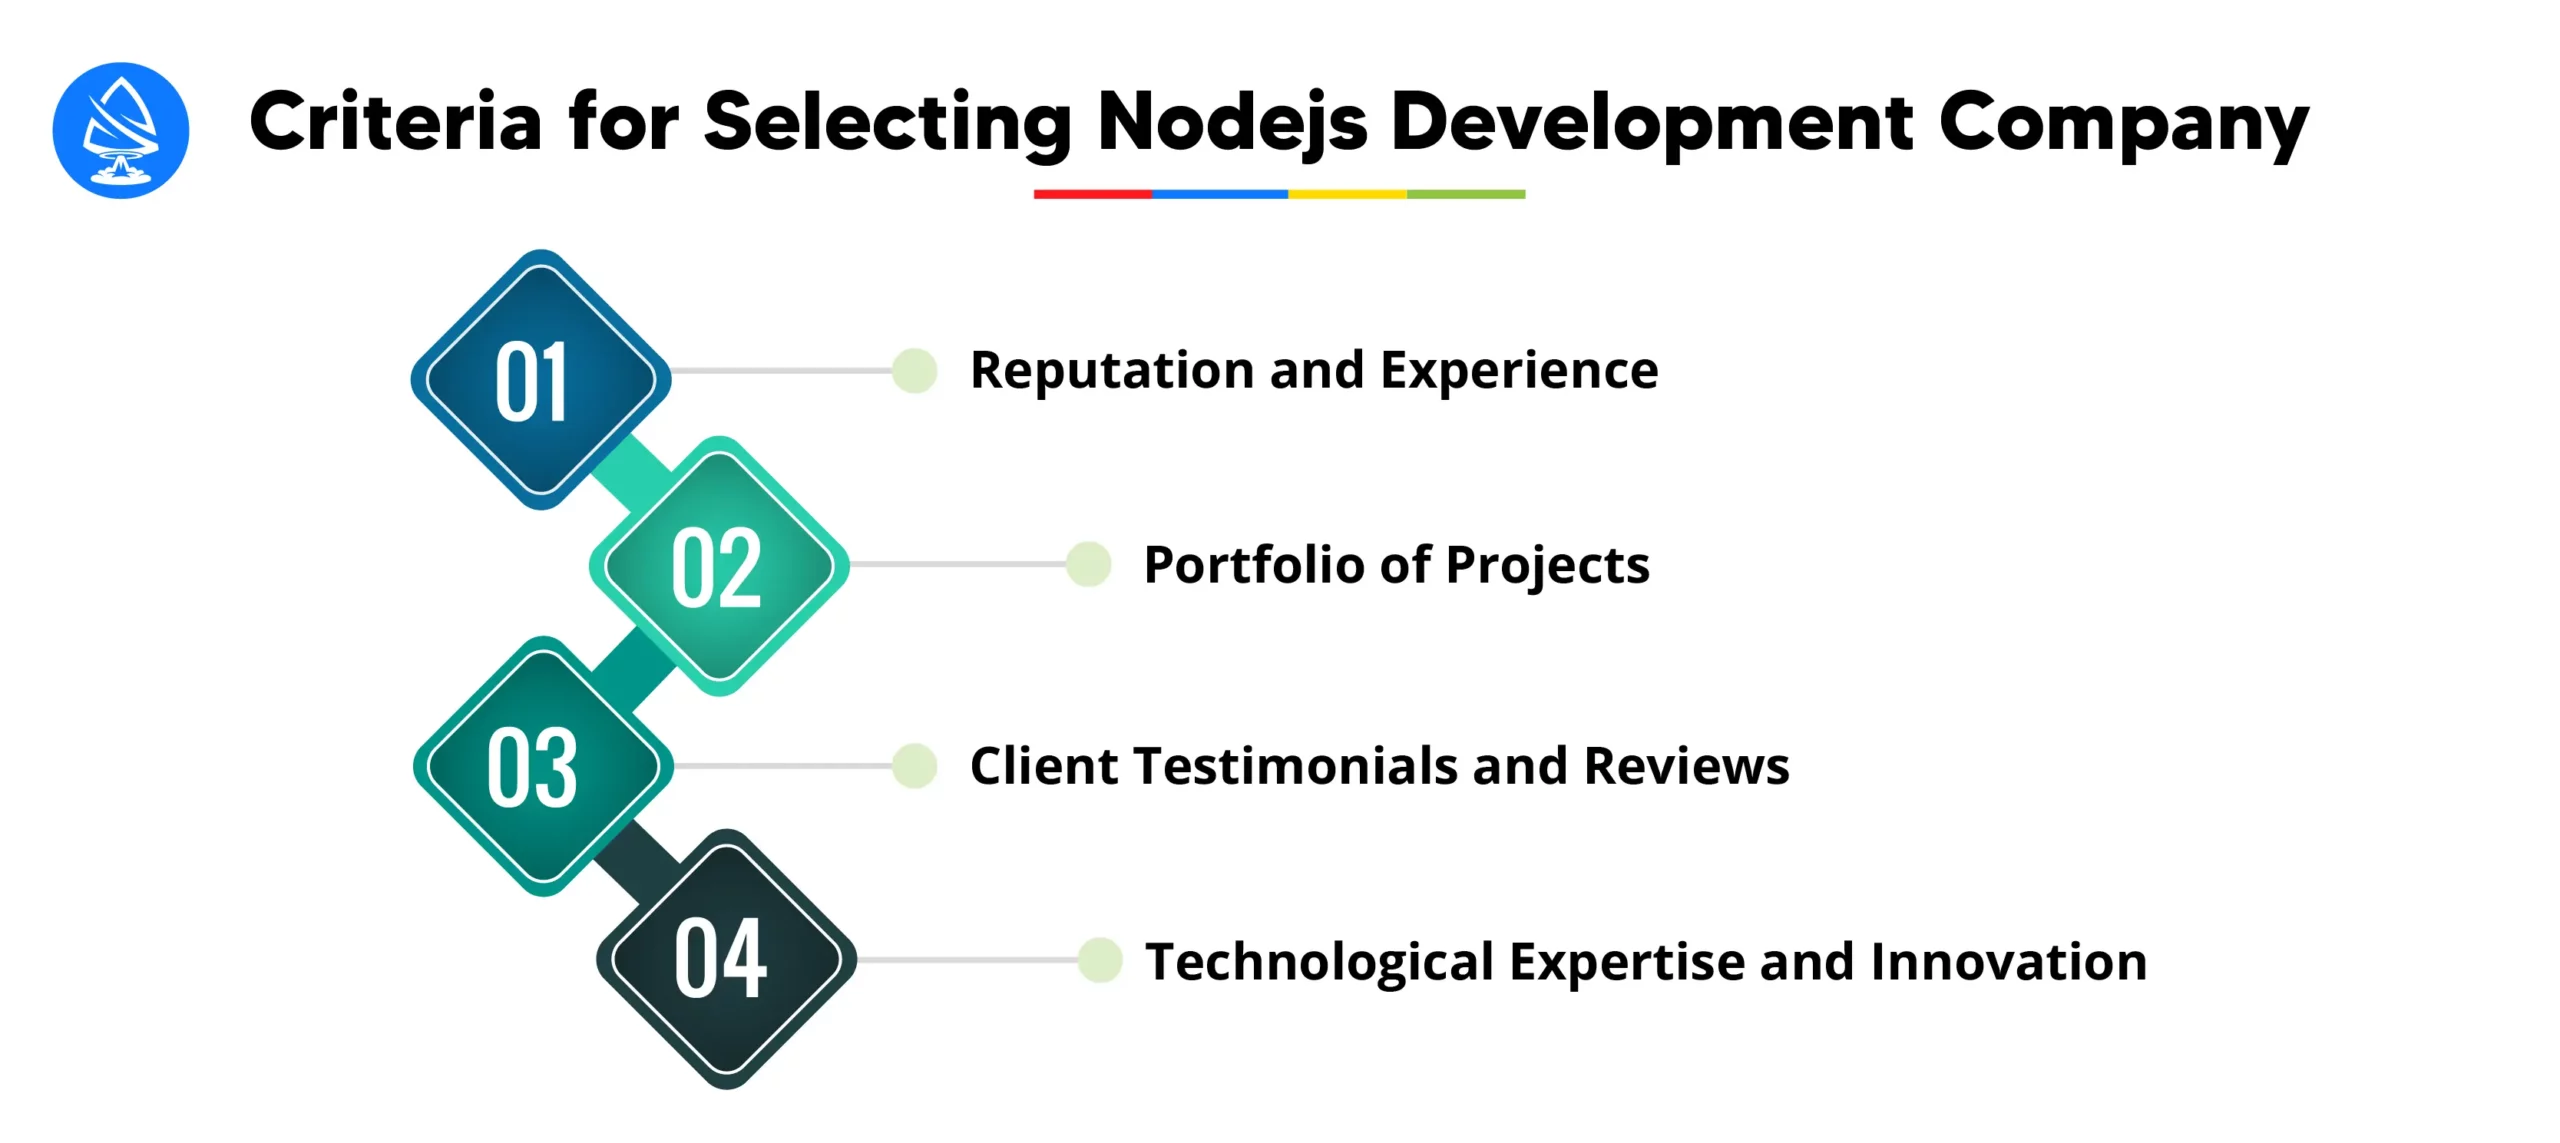 Criteria for Selecting the Right Nodejs Development Companies 